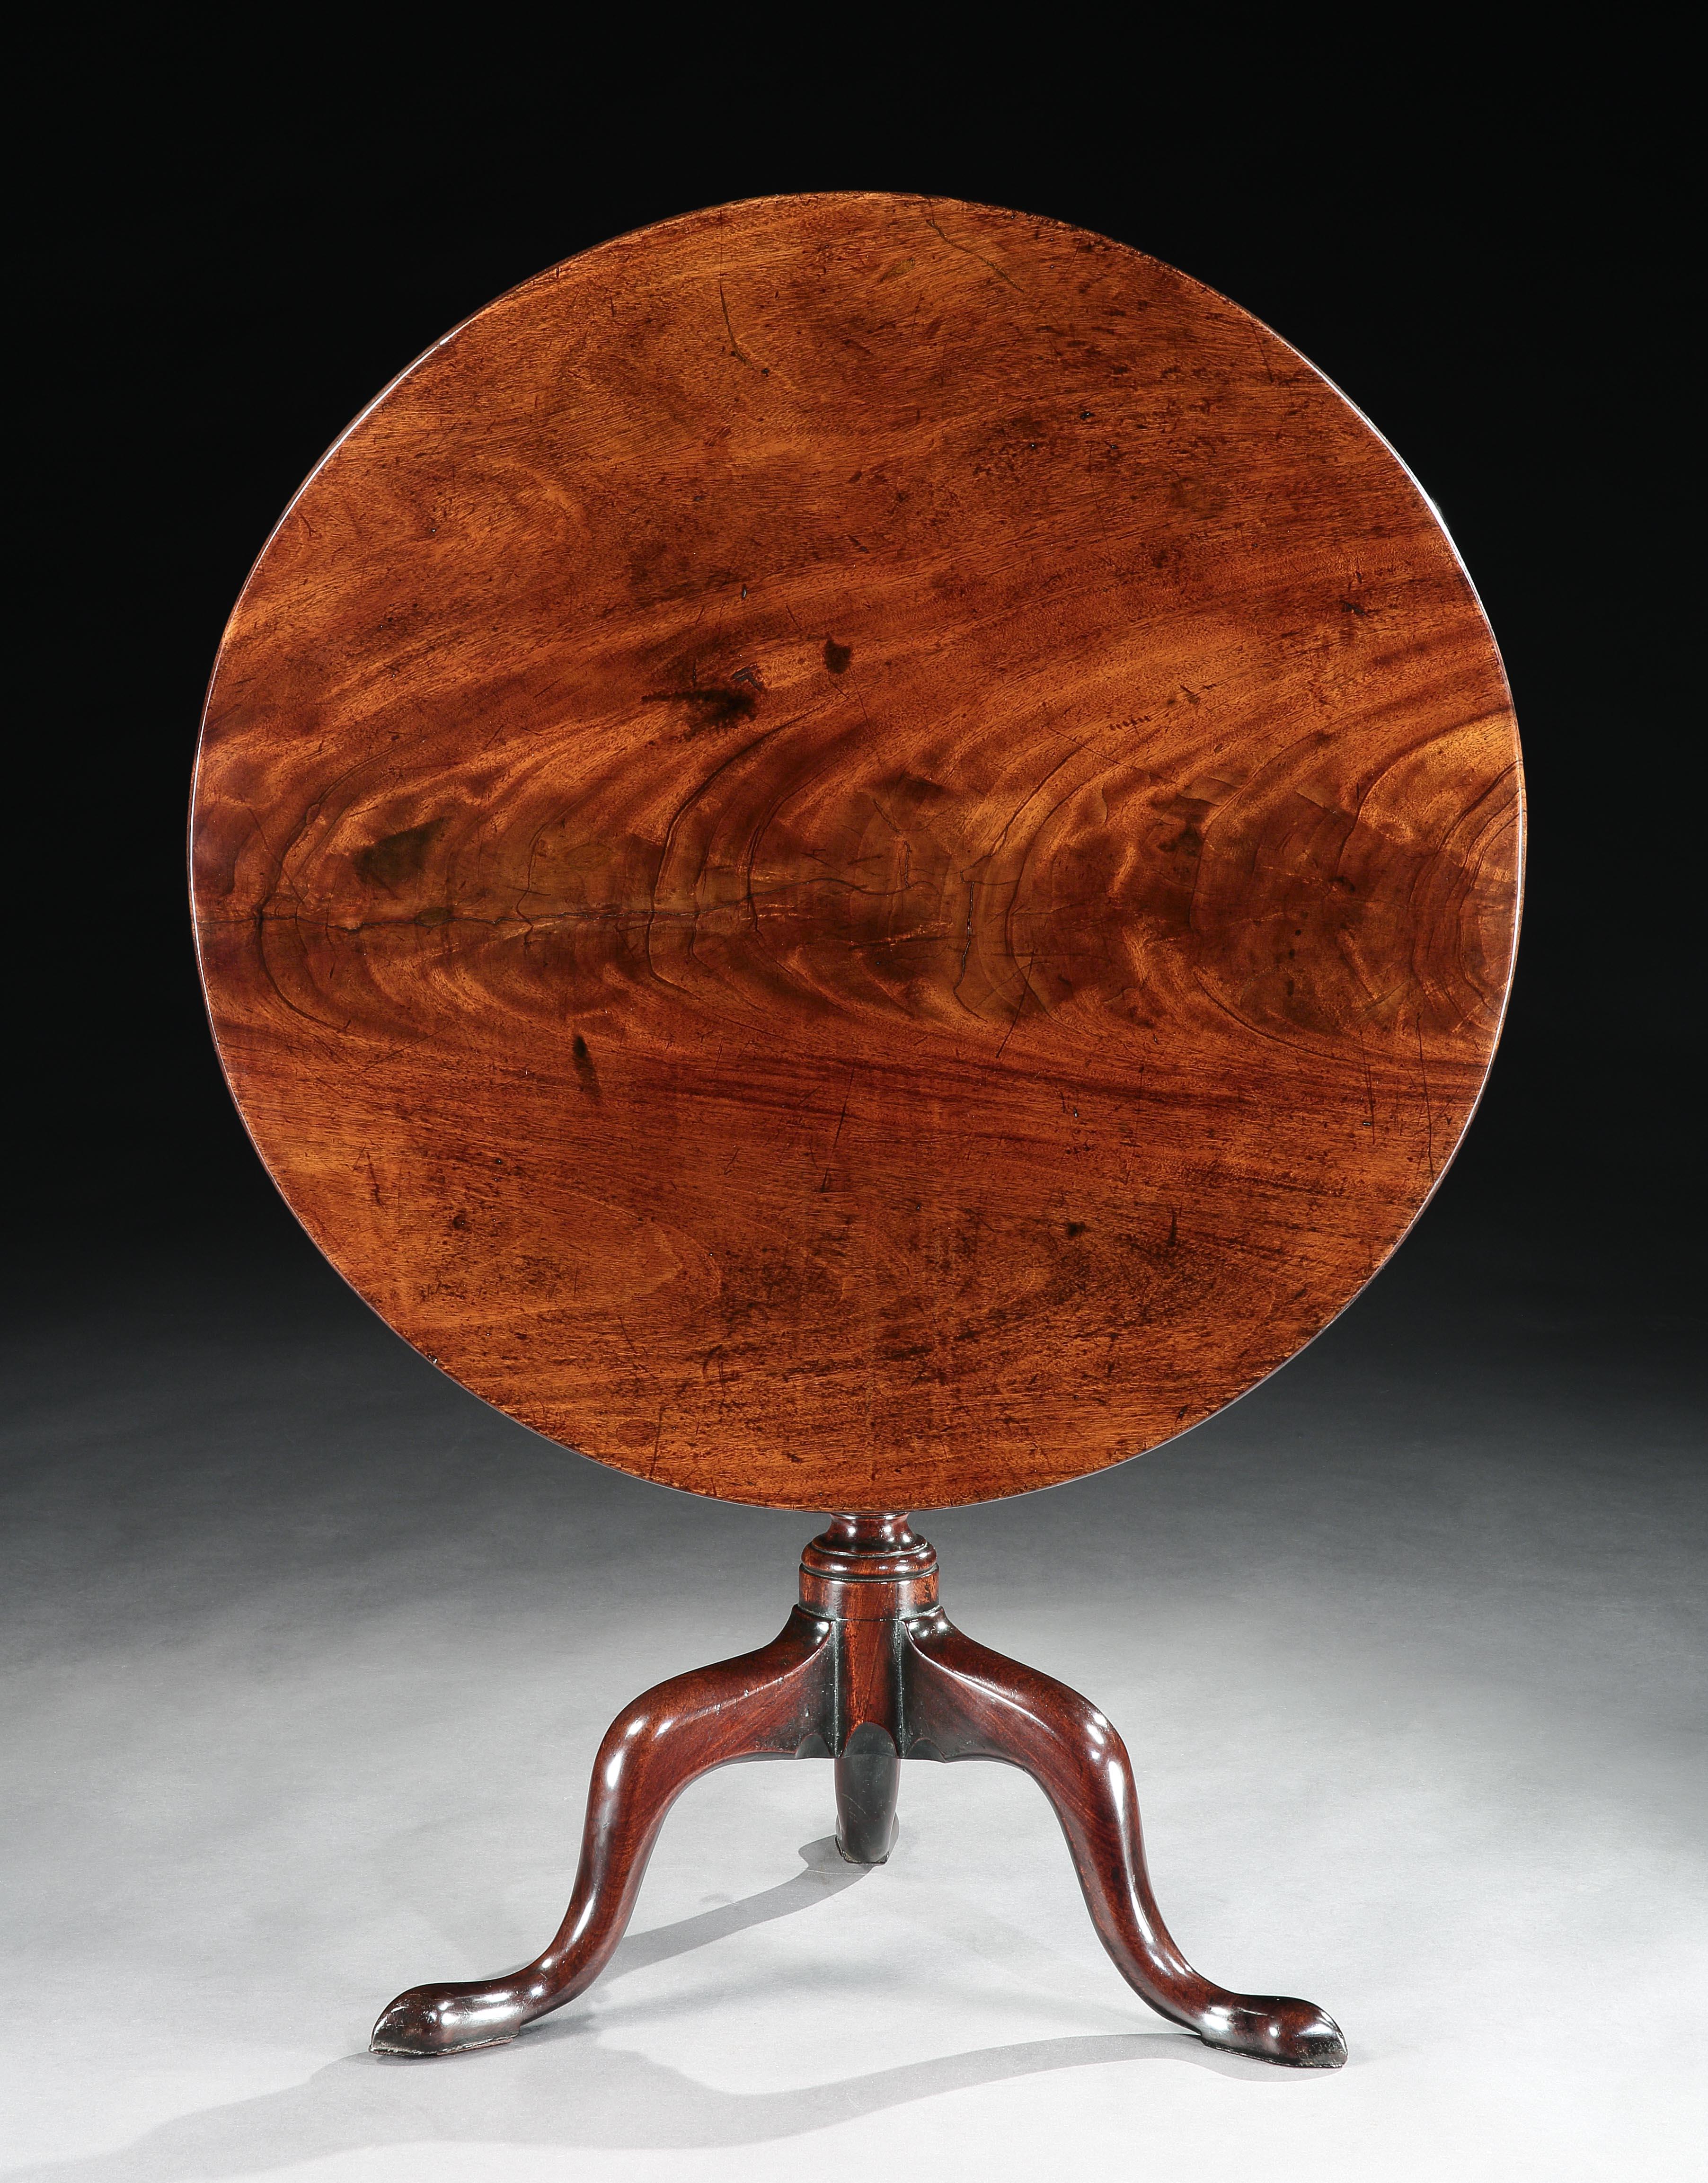 The circular 2 cm/0.75in thick, tilt-top is made from a solid piece of mahogany with beautiful flame figuring. Unusually, the tilt-top mechanism and brassware are original. The stem with fine column and vase shaped turnings carved with ring and